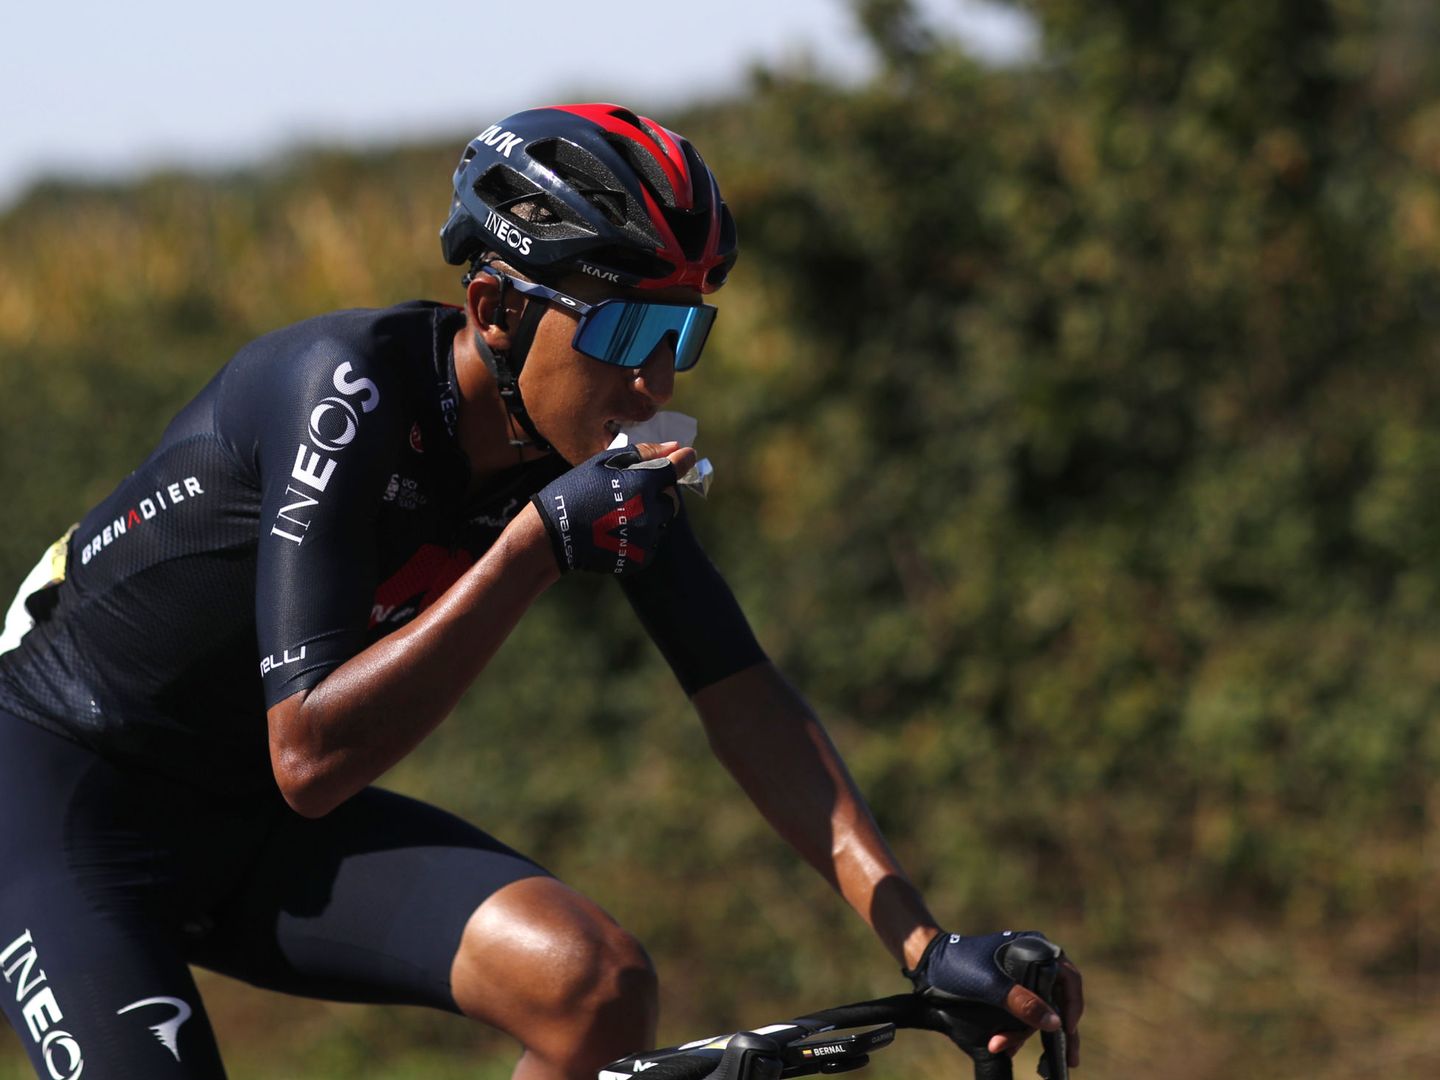 Cycling - Tour de France - Stage 15 - Lyon to Grand Colombier - France - September 13, 2020.  Team INEOS Grenadiers rider Egan Bernal of Colombia in action REUTERS Stephane Mahe